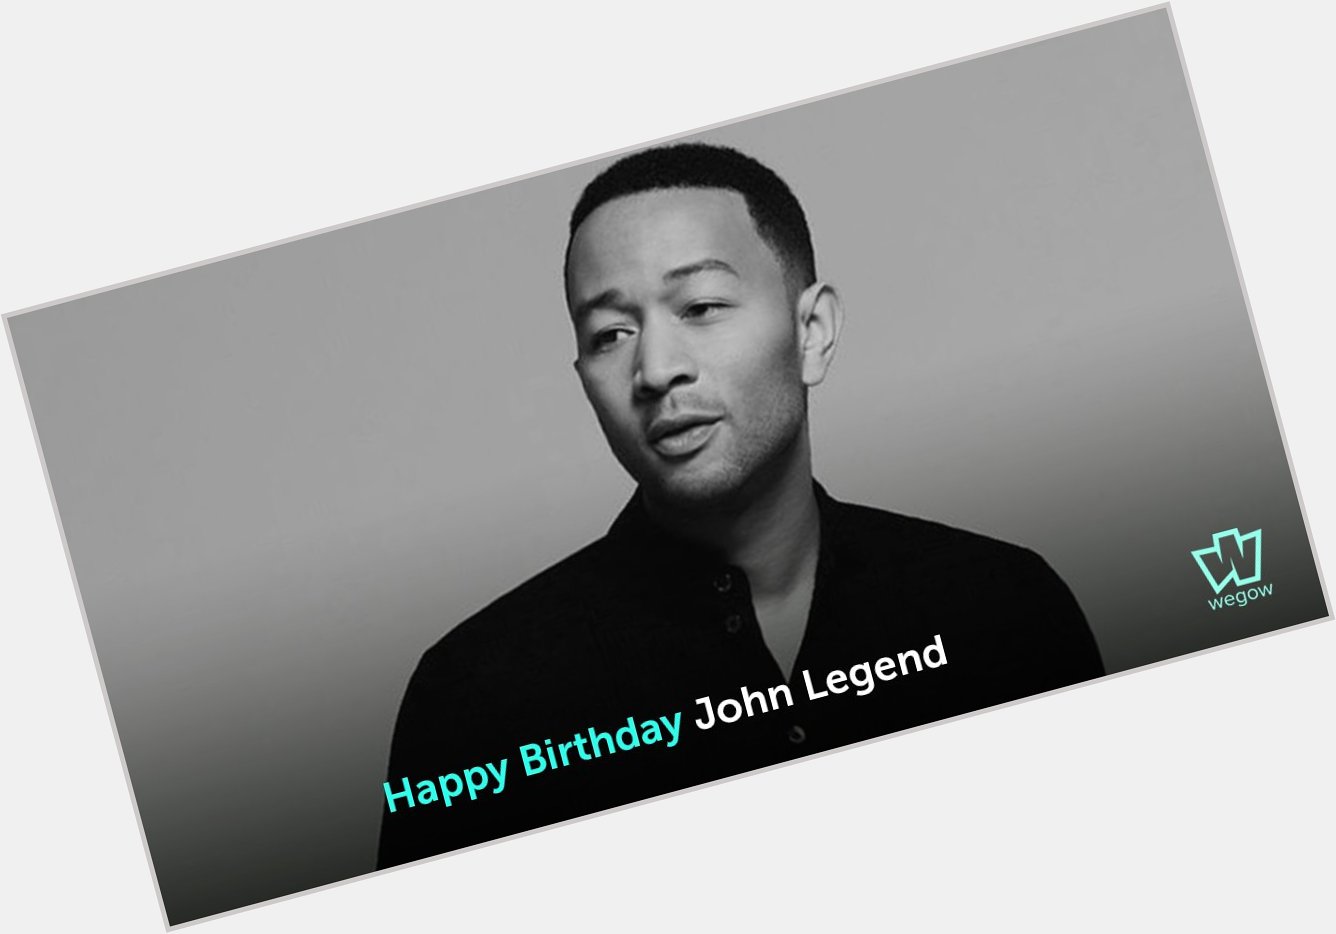 Happy birthday John Legend  . Follow the artist profile and nevew miss a gig again 